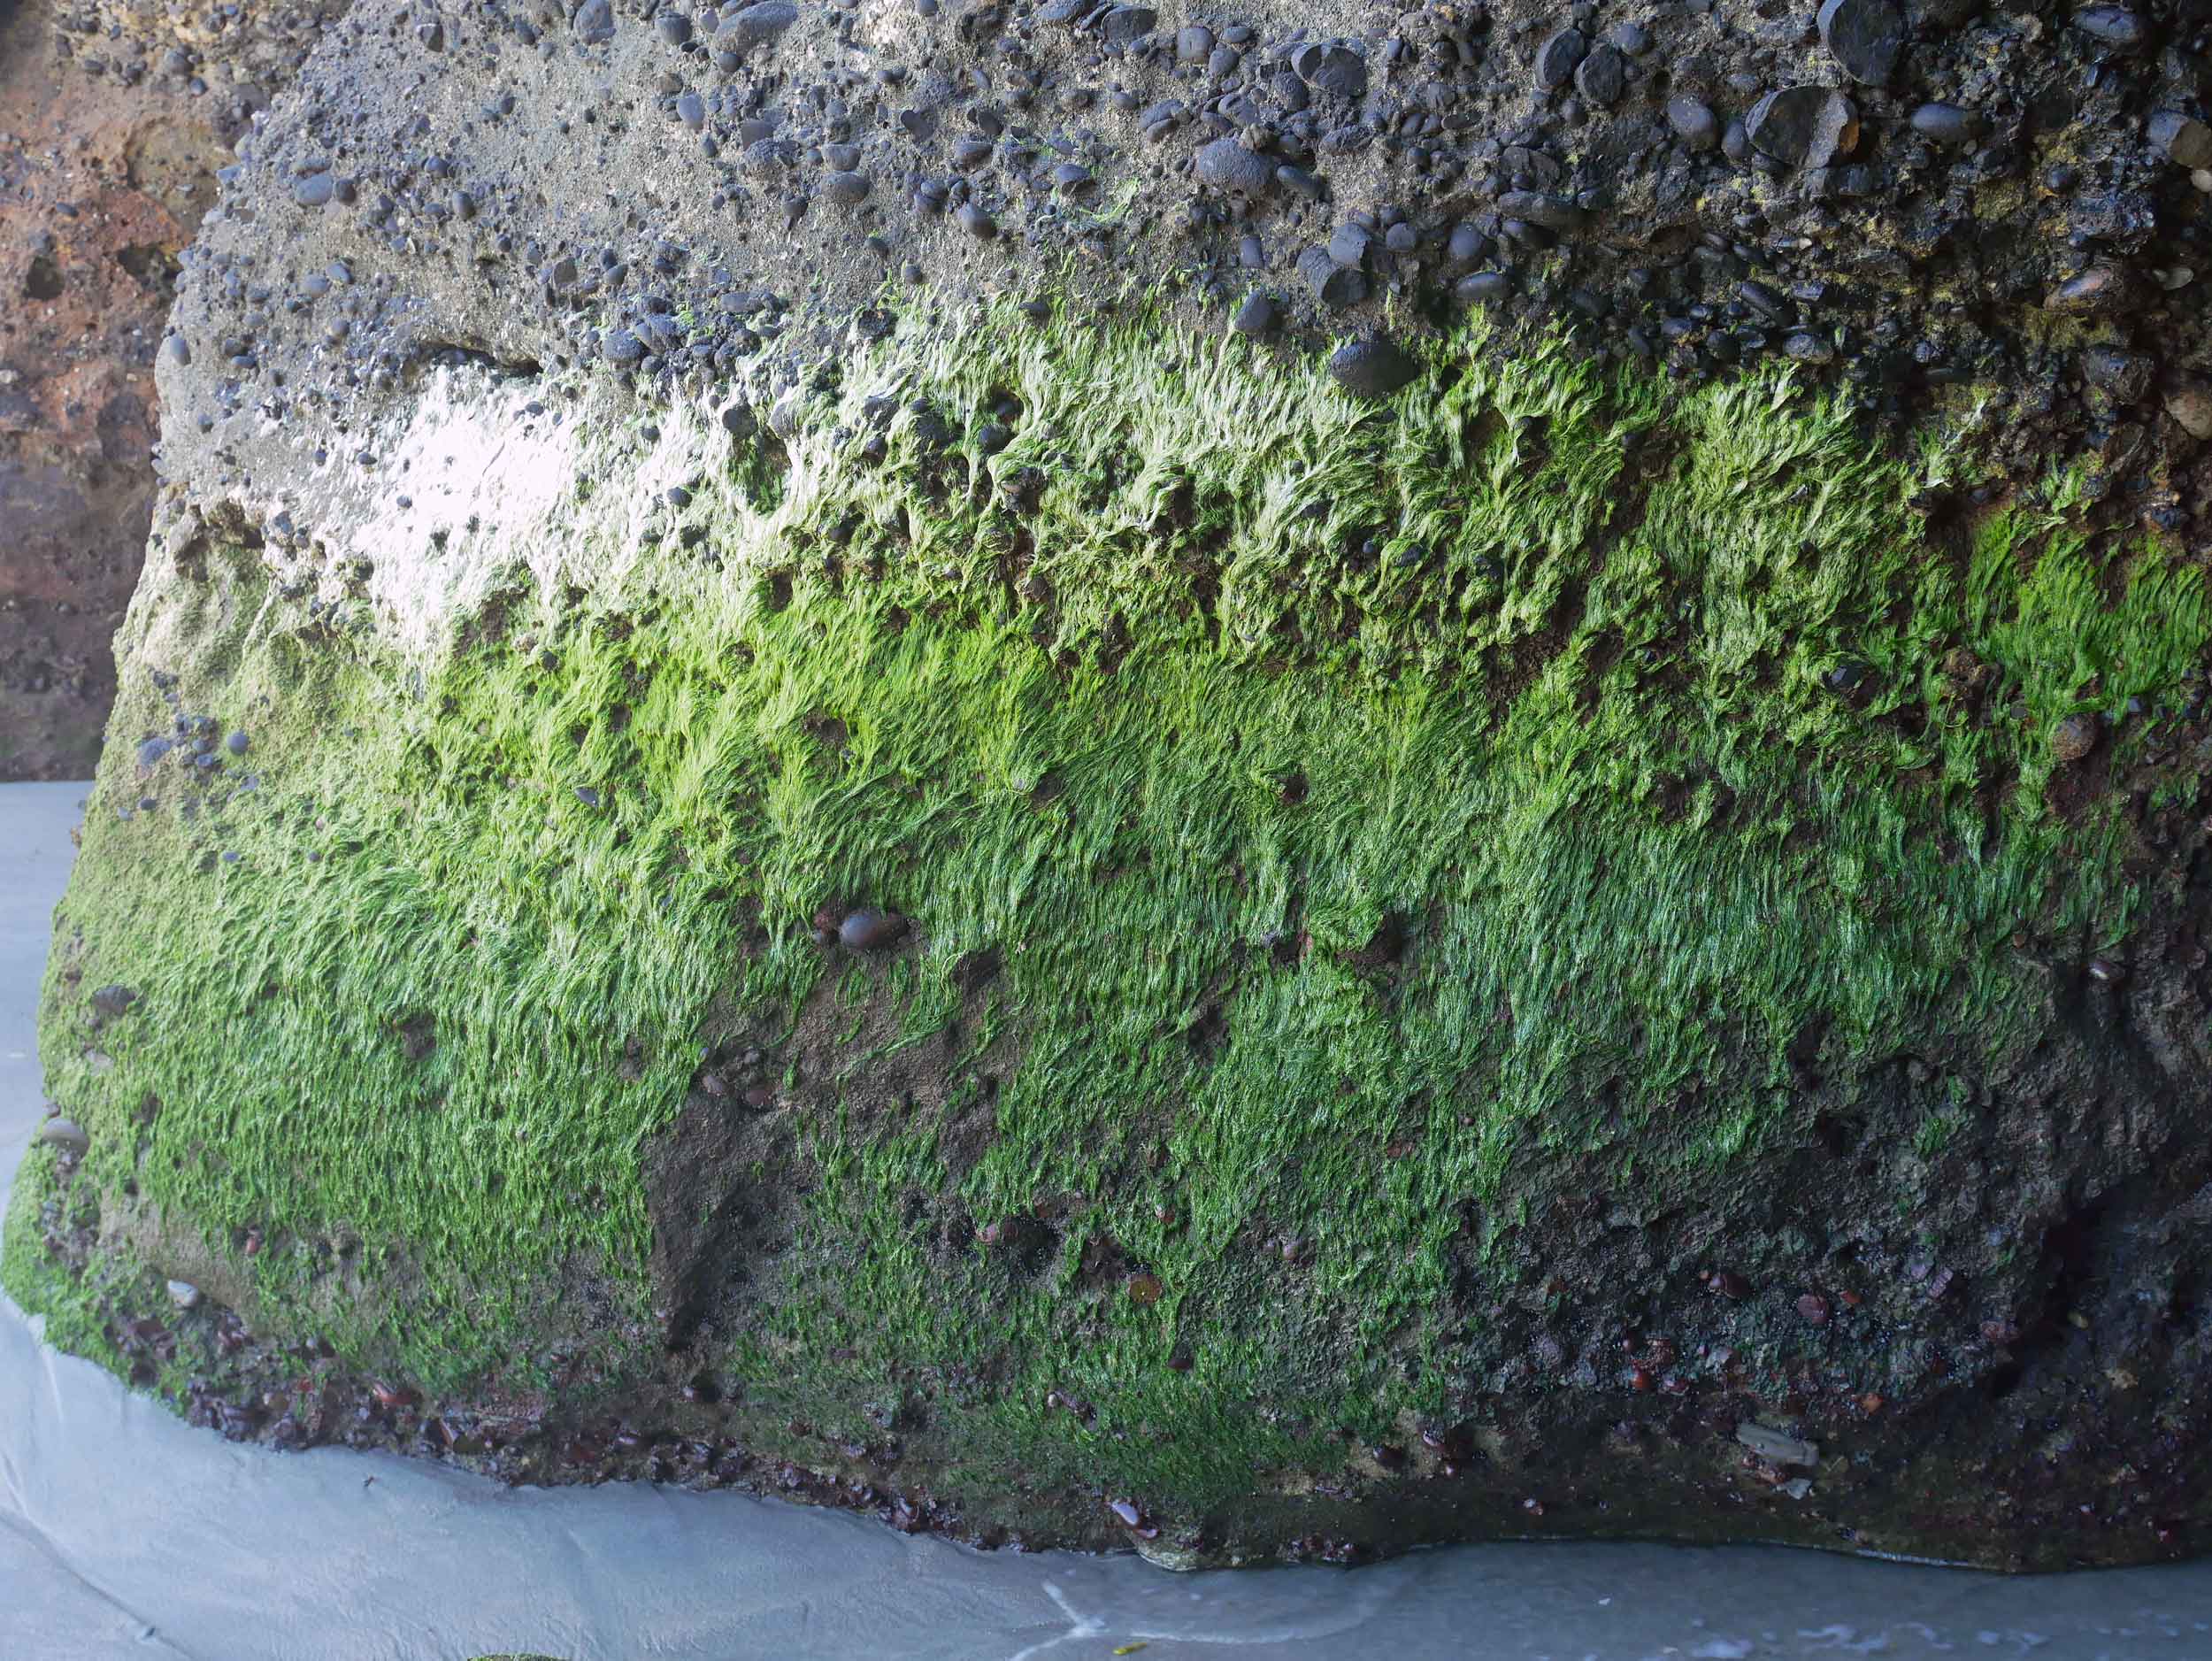  The ombre mossy greens covering the giant rocks along Wharariki Beach (Jan 13).&nbsp; 